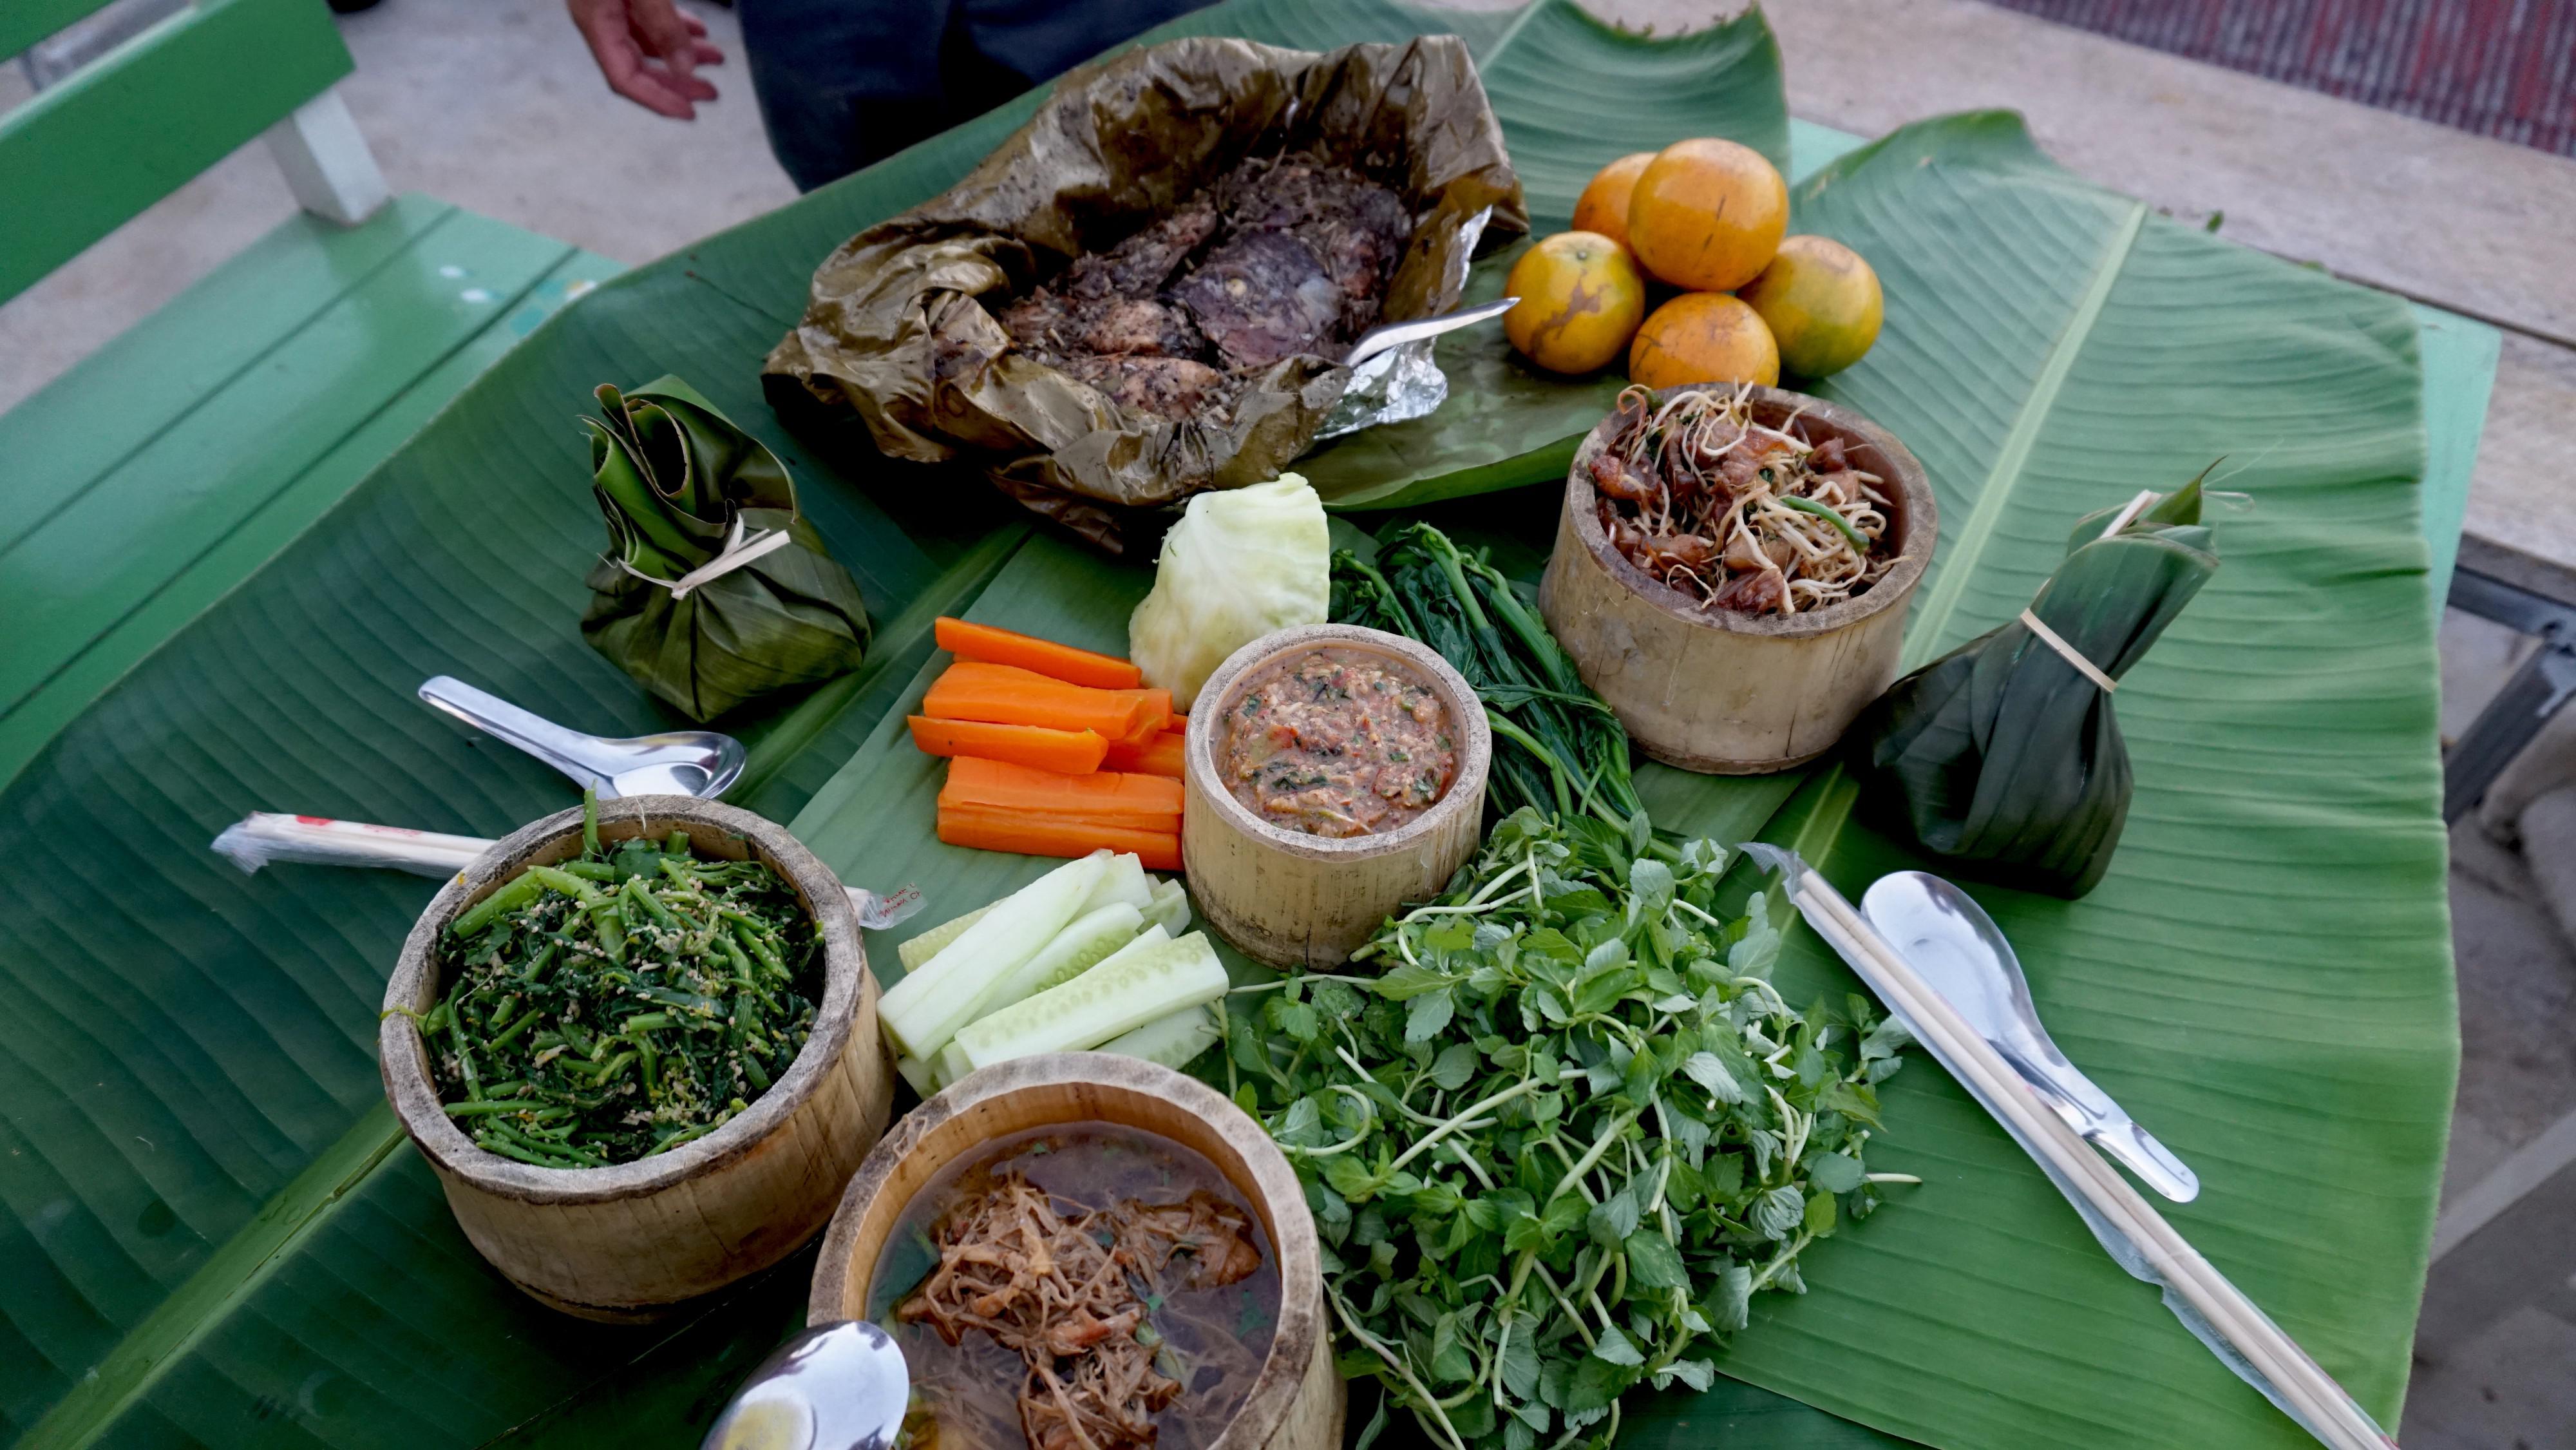 Akha cuisine is a highlight of the region, prepared using the ample fresh ingredients found in the area. You’d be hard pressed to turn down seconds.